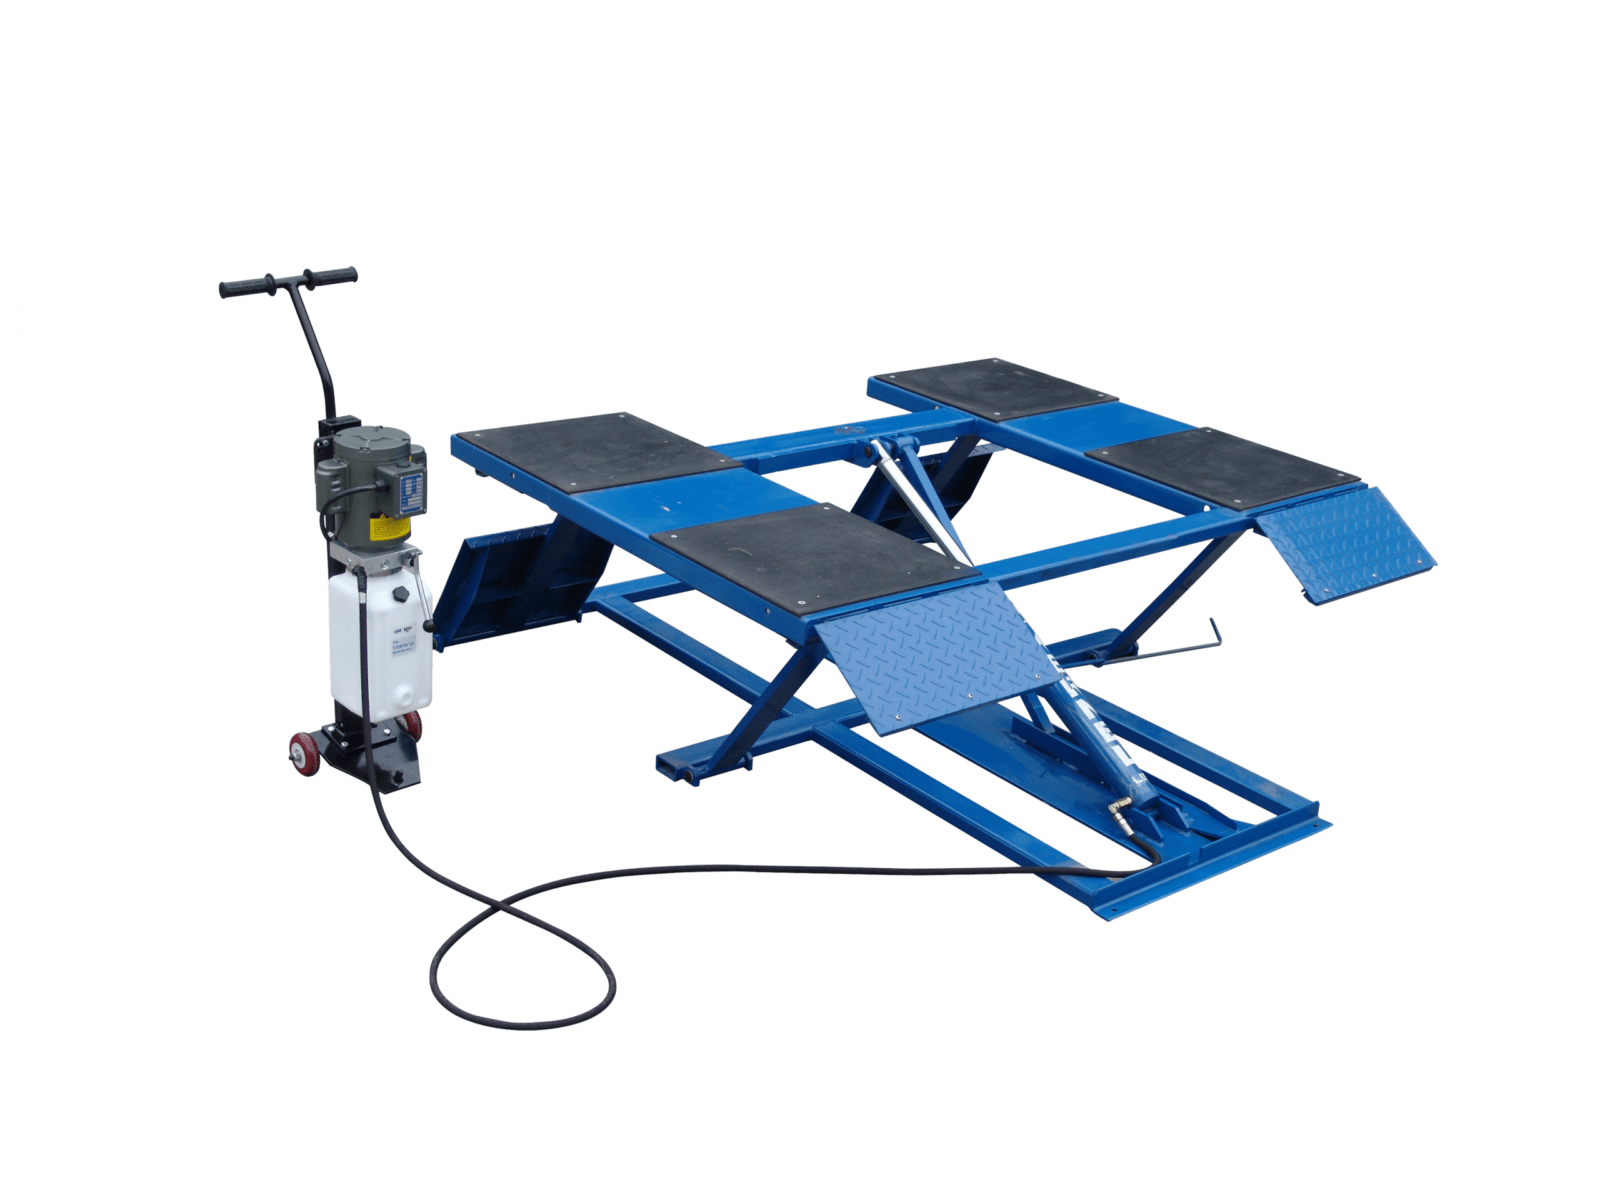 Easy frame lifting on padded runways. Great for wheel and brake work, tire and wheel changing as well as new car preparation.